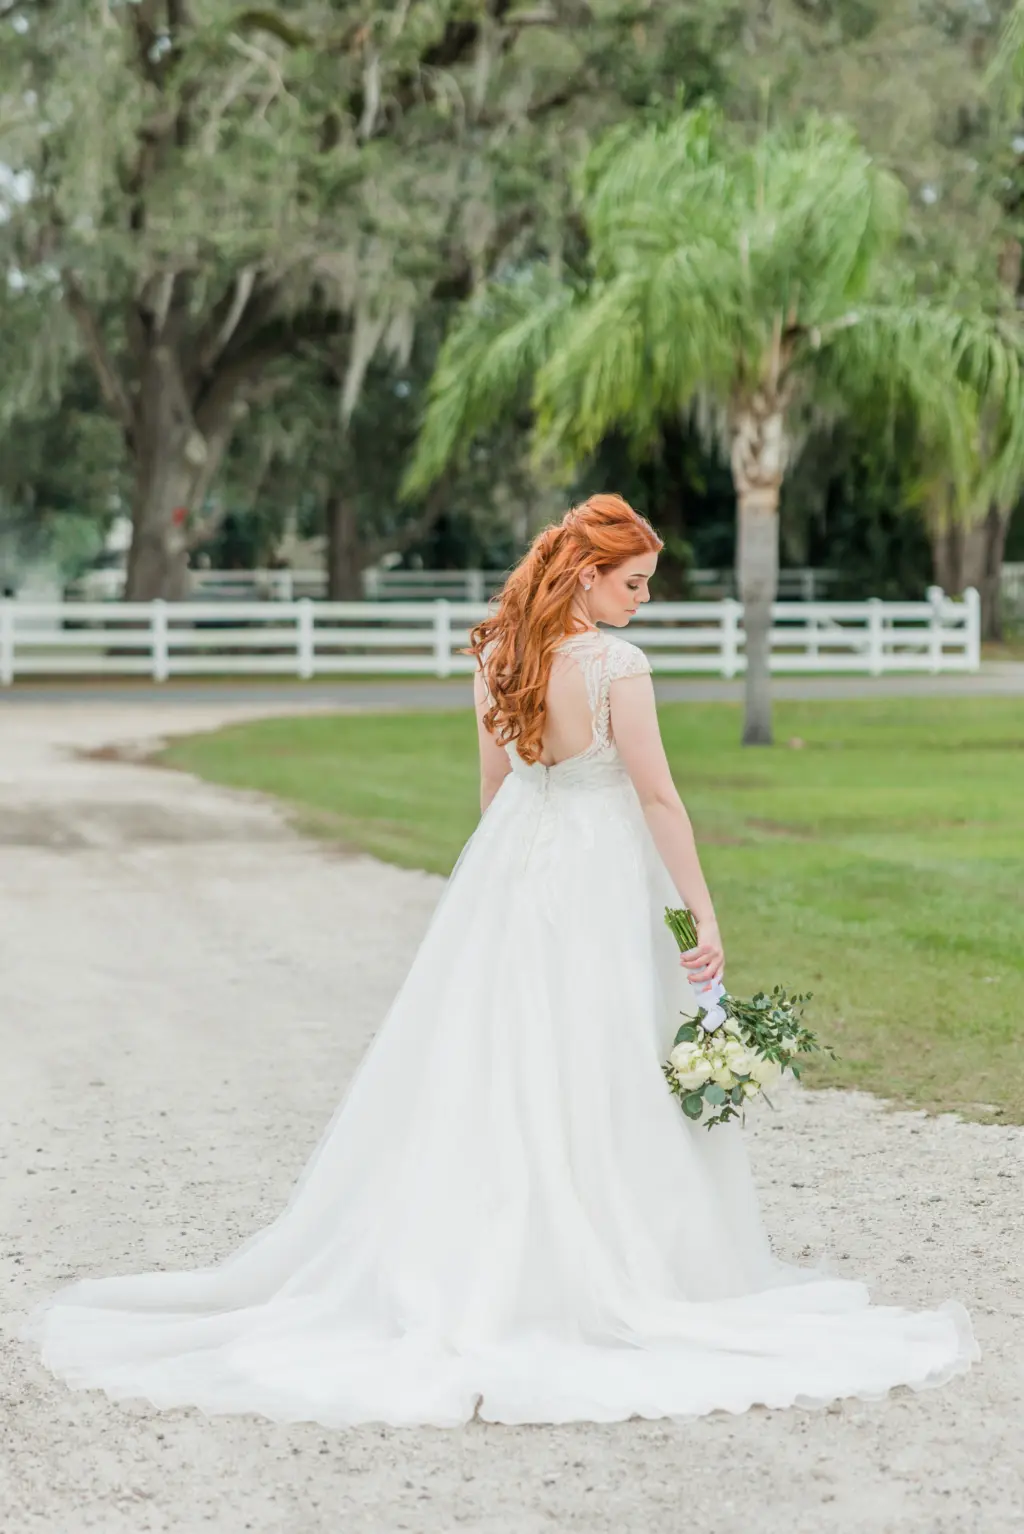 Elegant Bridal Hair and Makeup Ideas | Ivory Lace and Sequin Cap-Sleeve Tulle A-Line David's Bridal Wedding Dress | Inspiration | Tampa Bay Photographer Mary Anna Photography